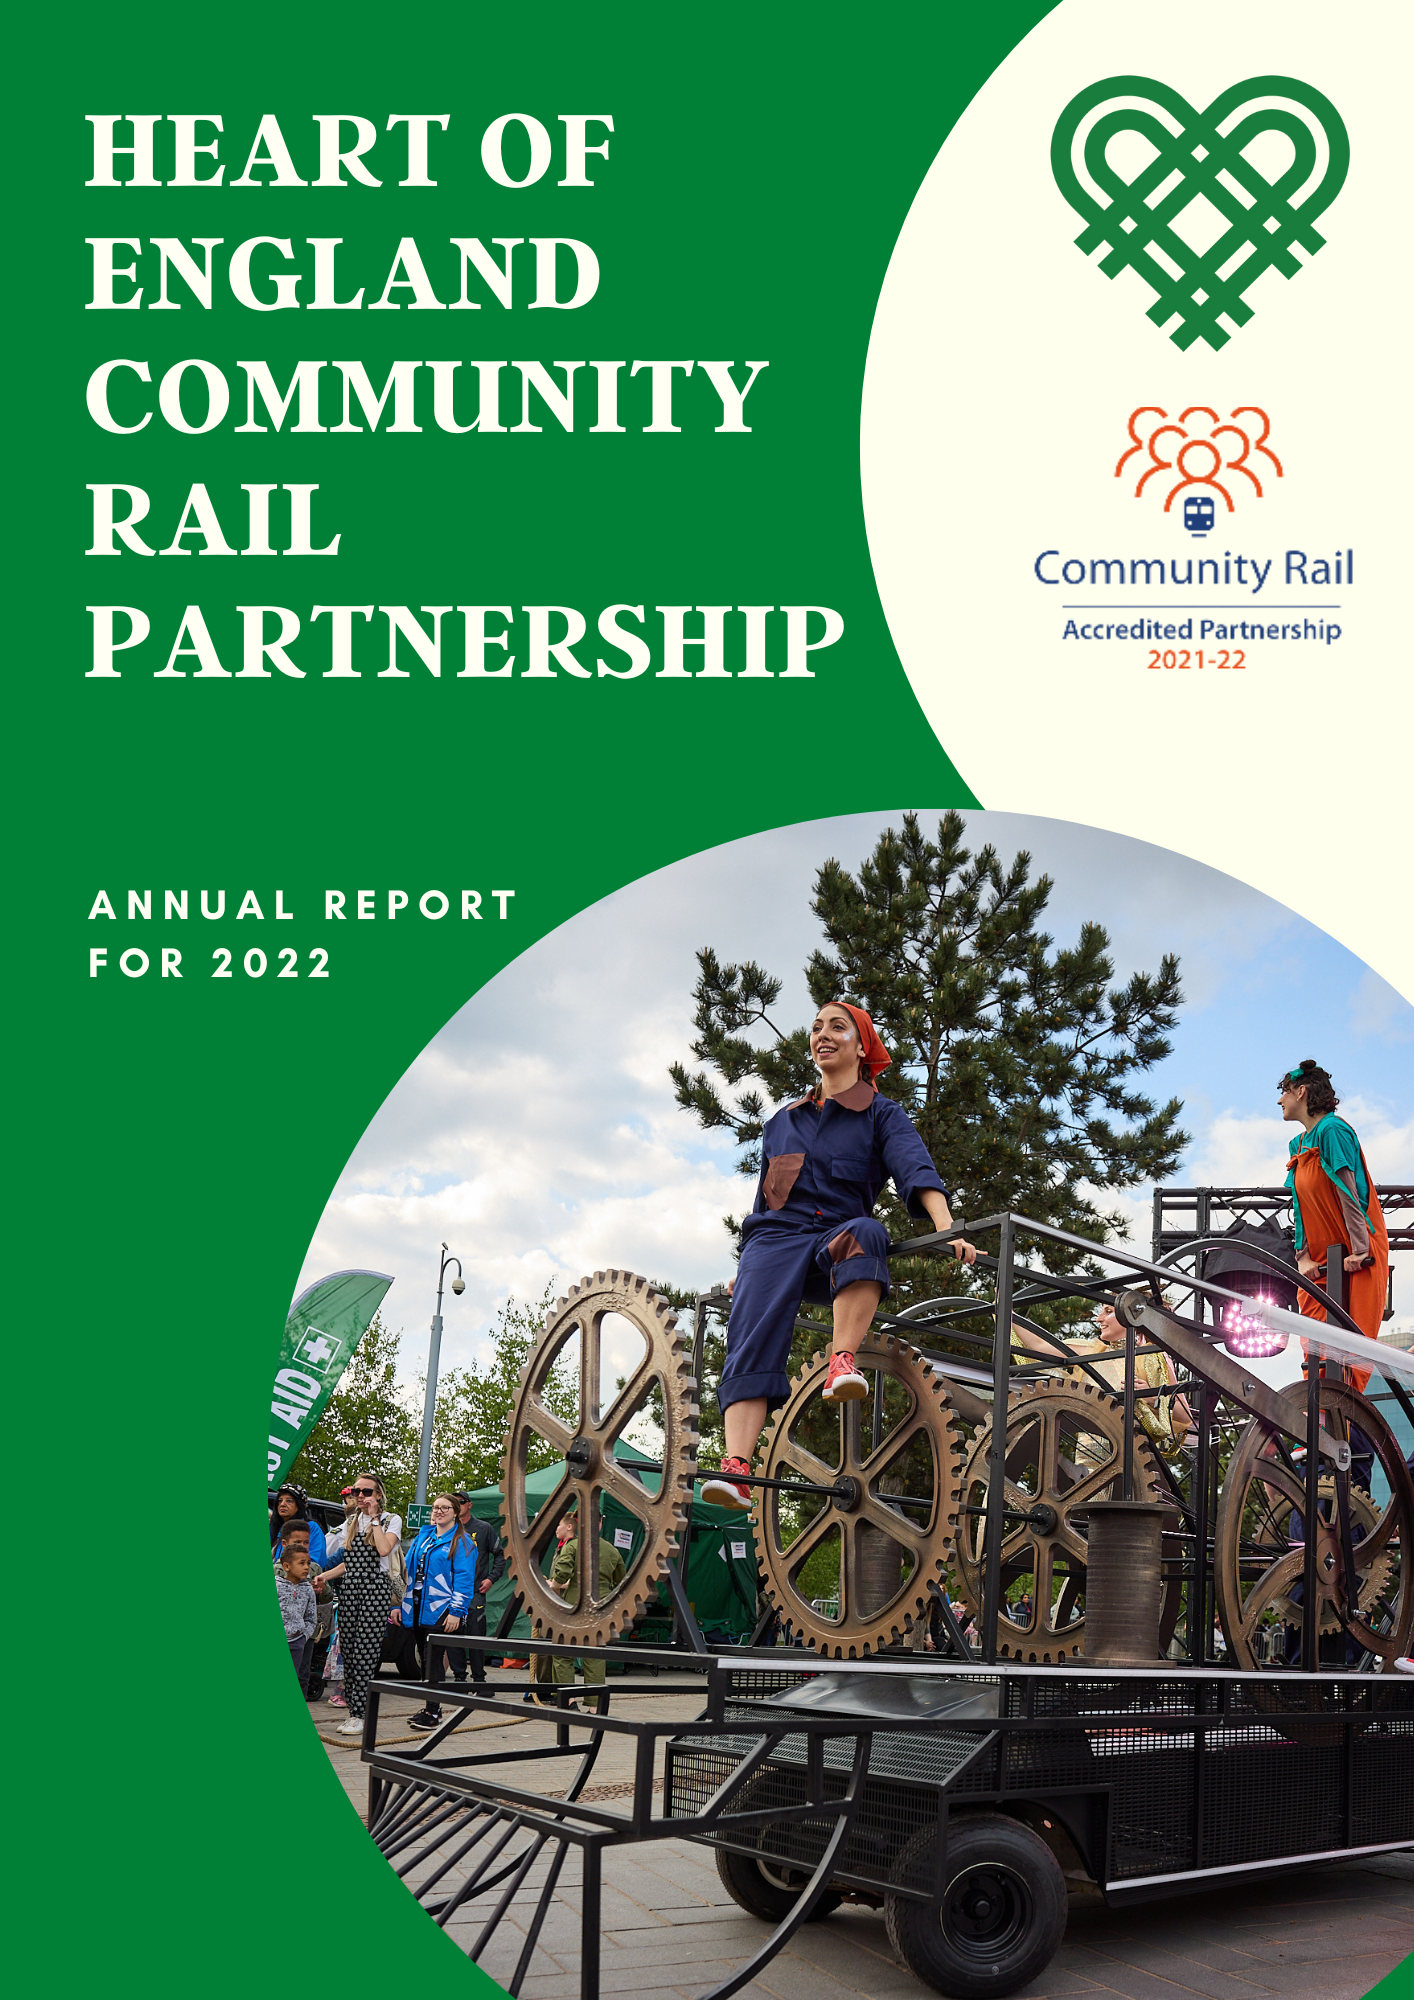 Picture of a performer on top of a metal train On a green and cream background with Heart of England Community Rail Partnership Annual Report 2022